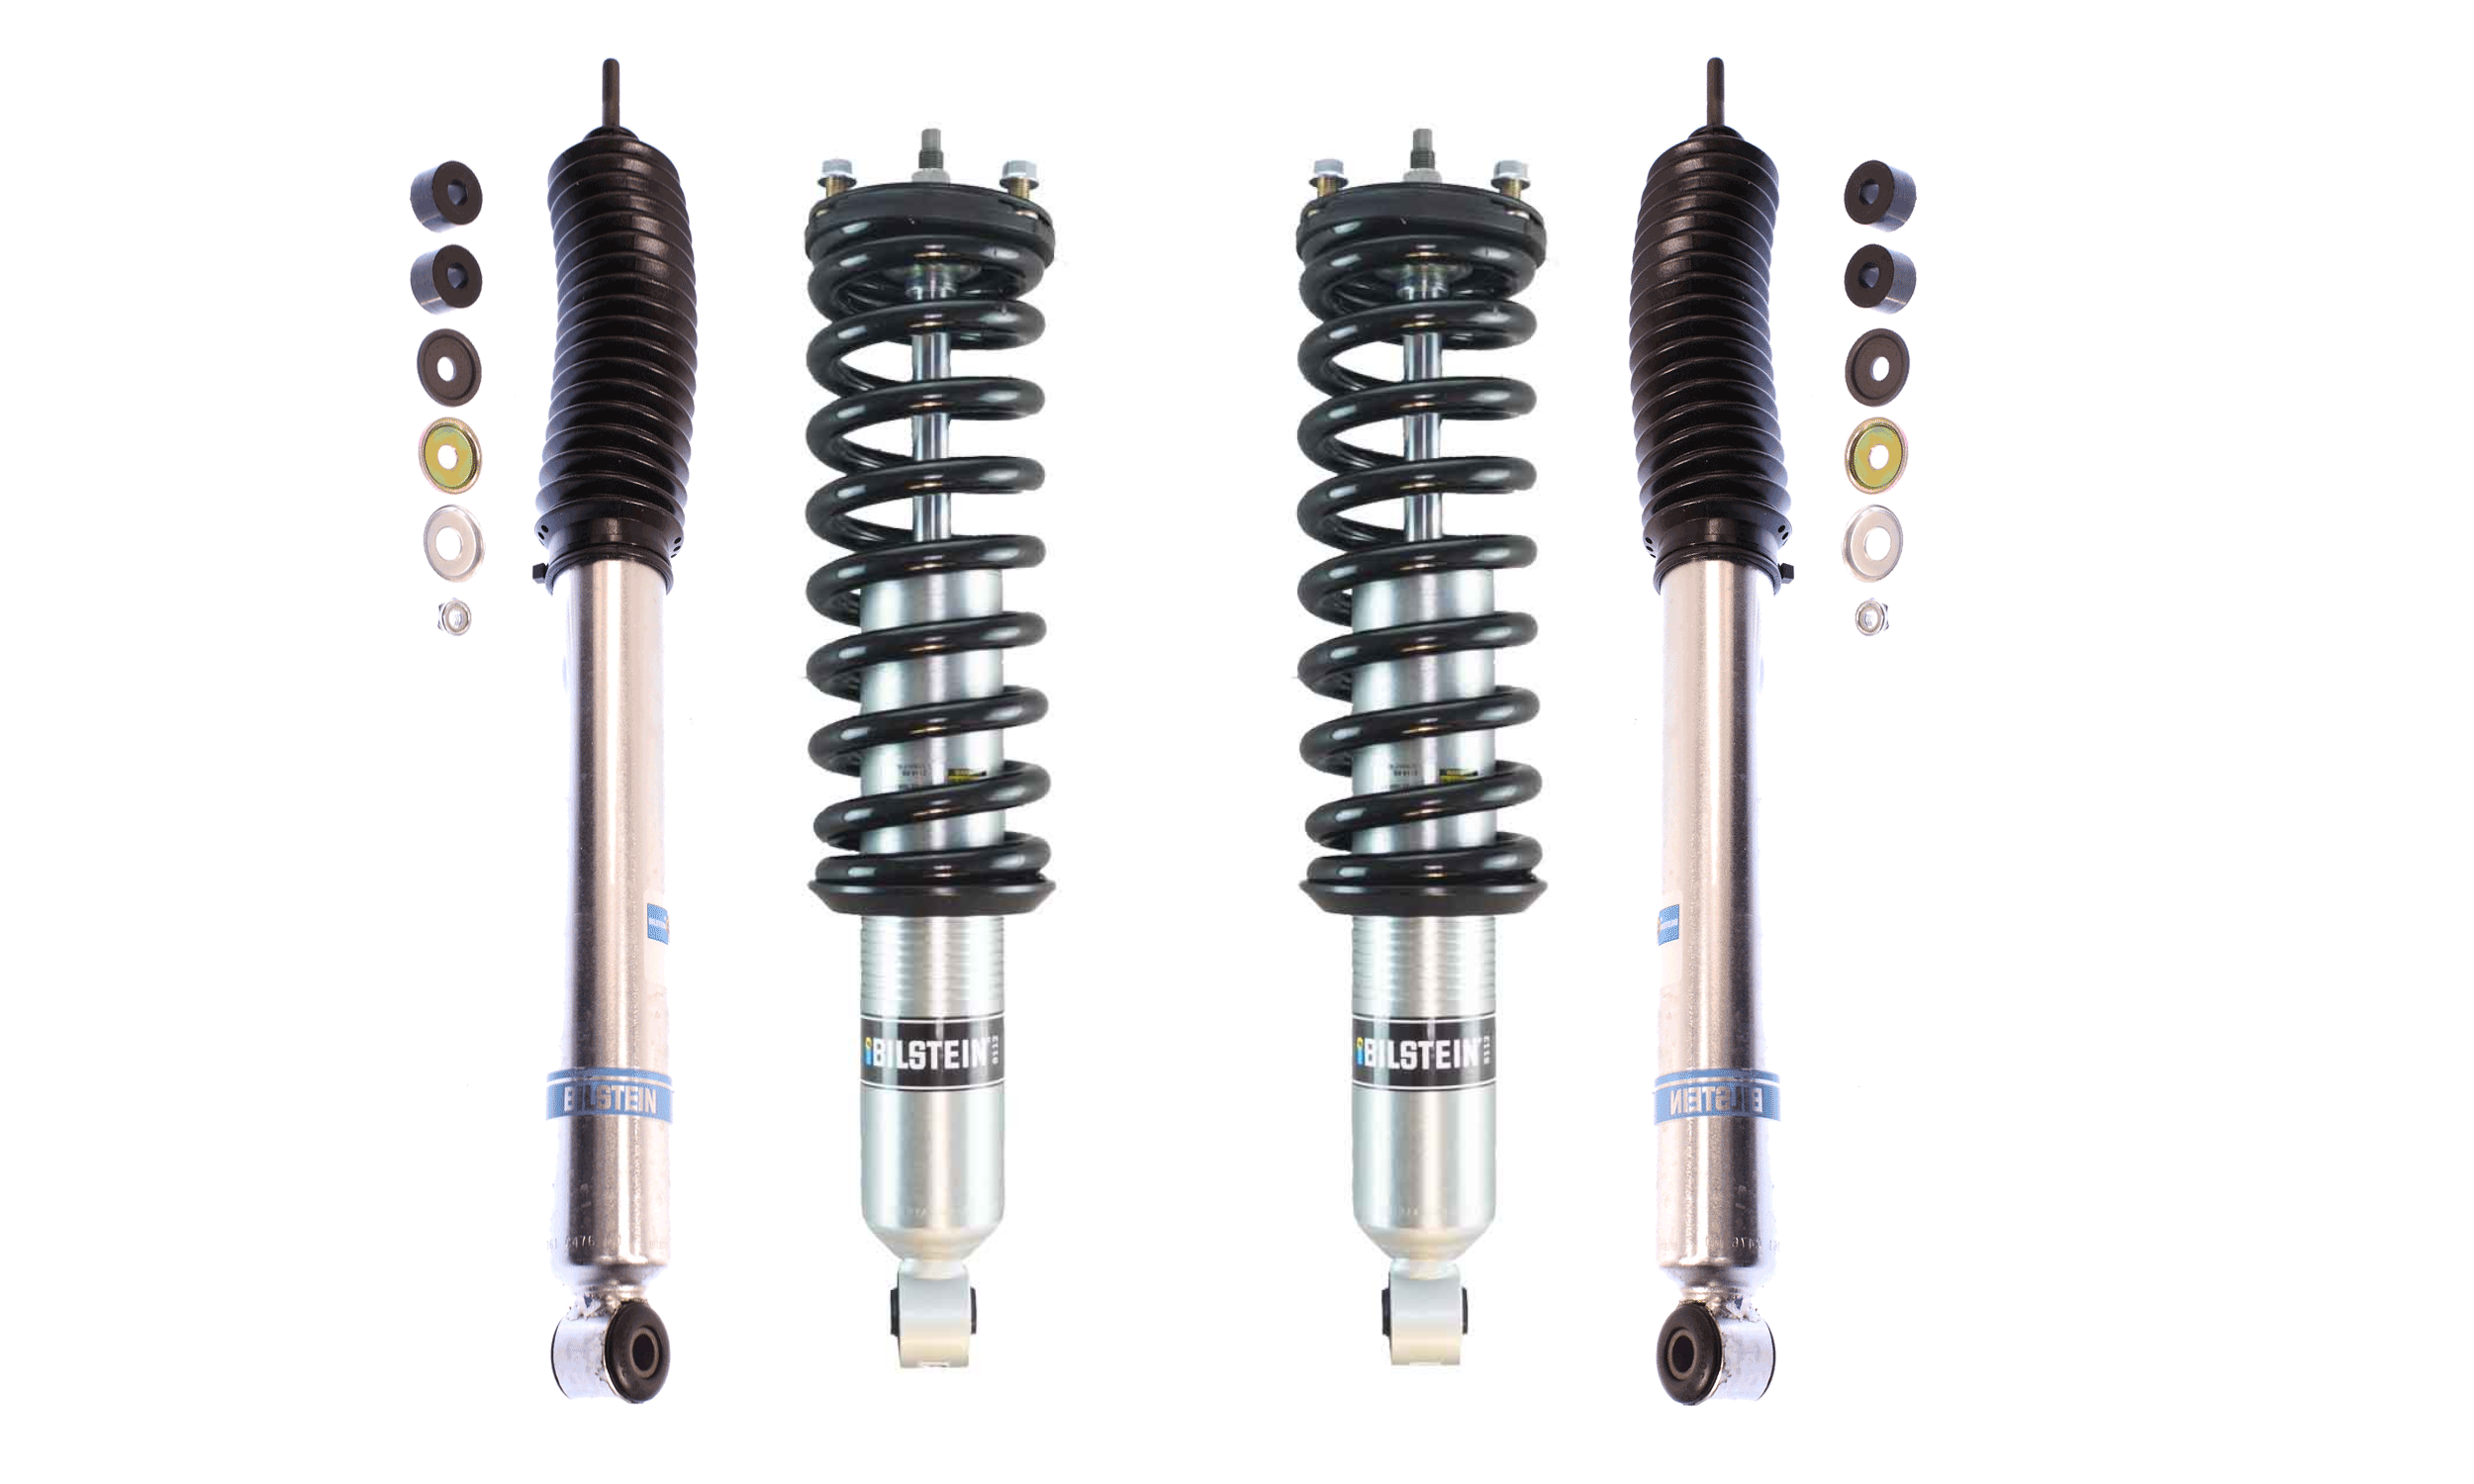 Bilstein 6112 .06-2.5 Front Assembled Coilovers and 5100 0-1 Rear Lift Shocks for 2005-2023 Toyota Tacoma